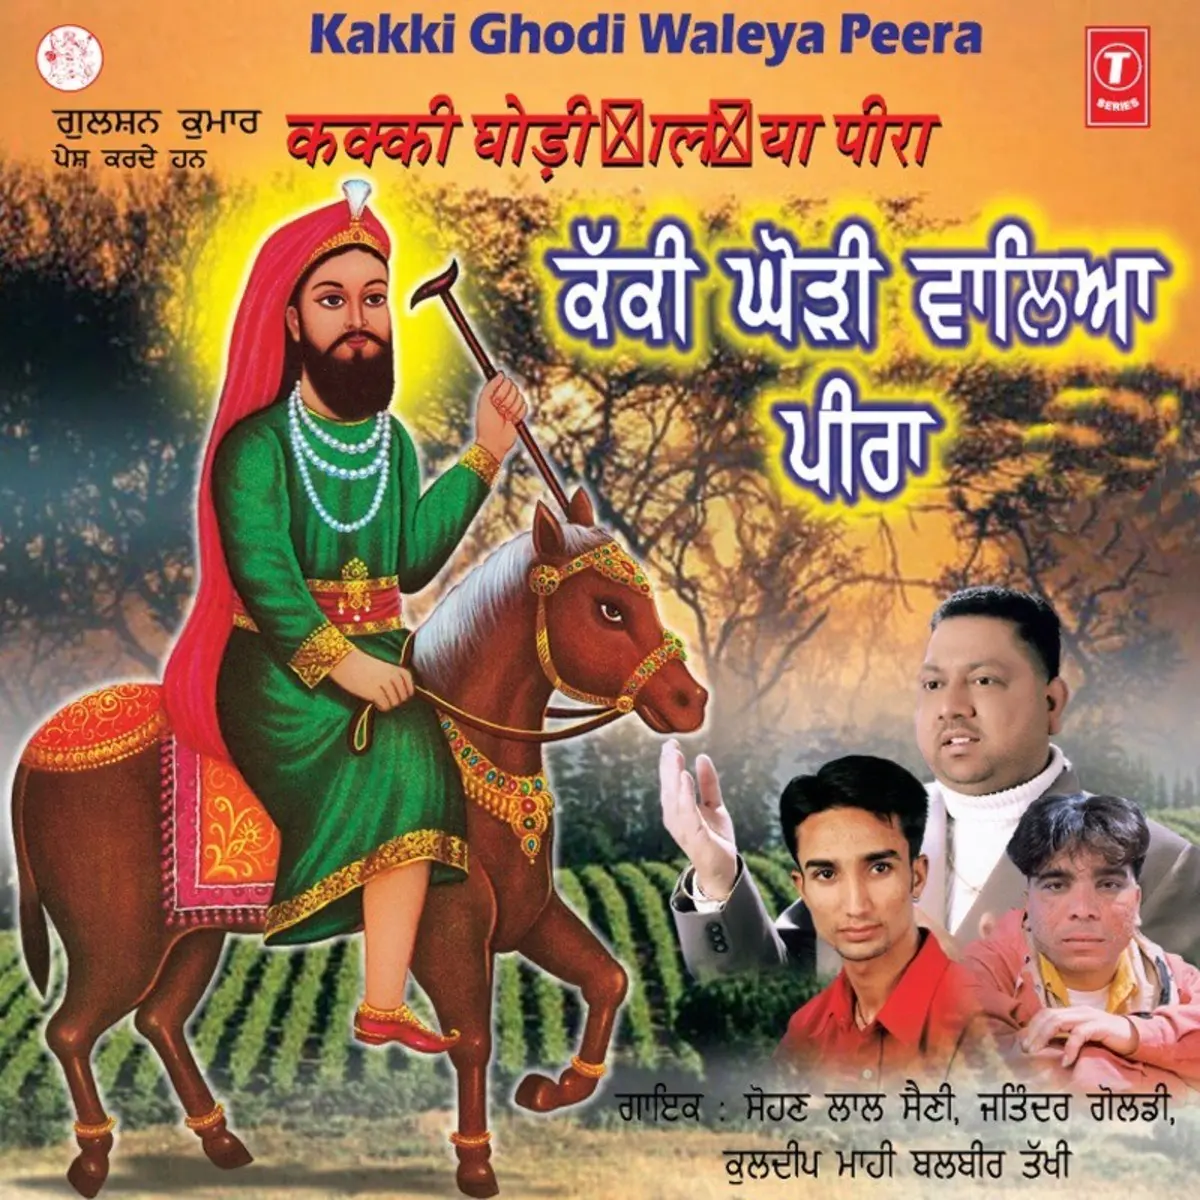 Kakki Ghodi Waleya Peera Songs Download Kakki Ghodi Waleya Peera Mp3 Punjabi Songs Online Free On Gaana Com For your search query ghodi wale mohan baba mp3 we have found 1000000 songs matching your query but showing only top 20 results. gaana